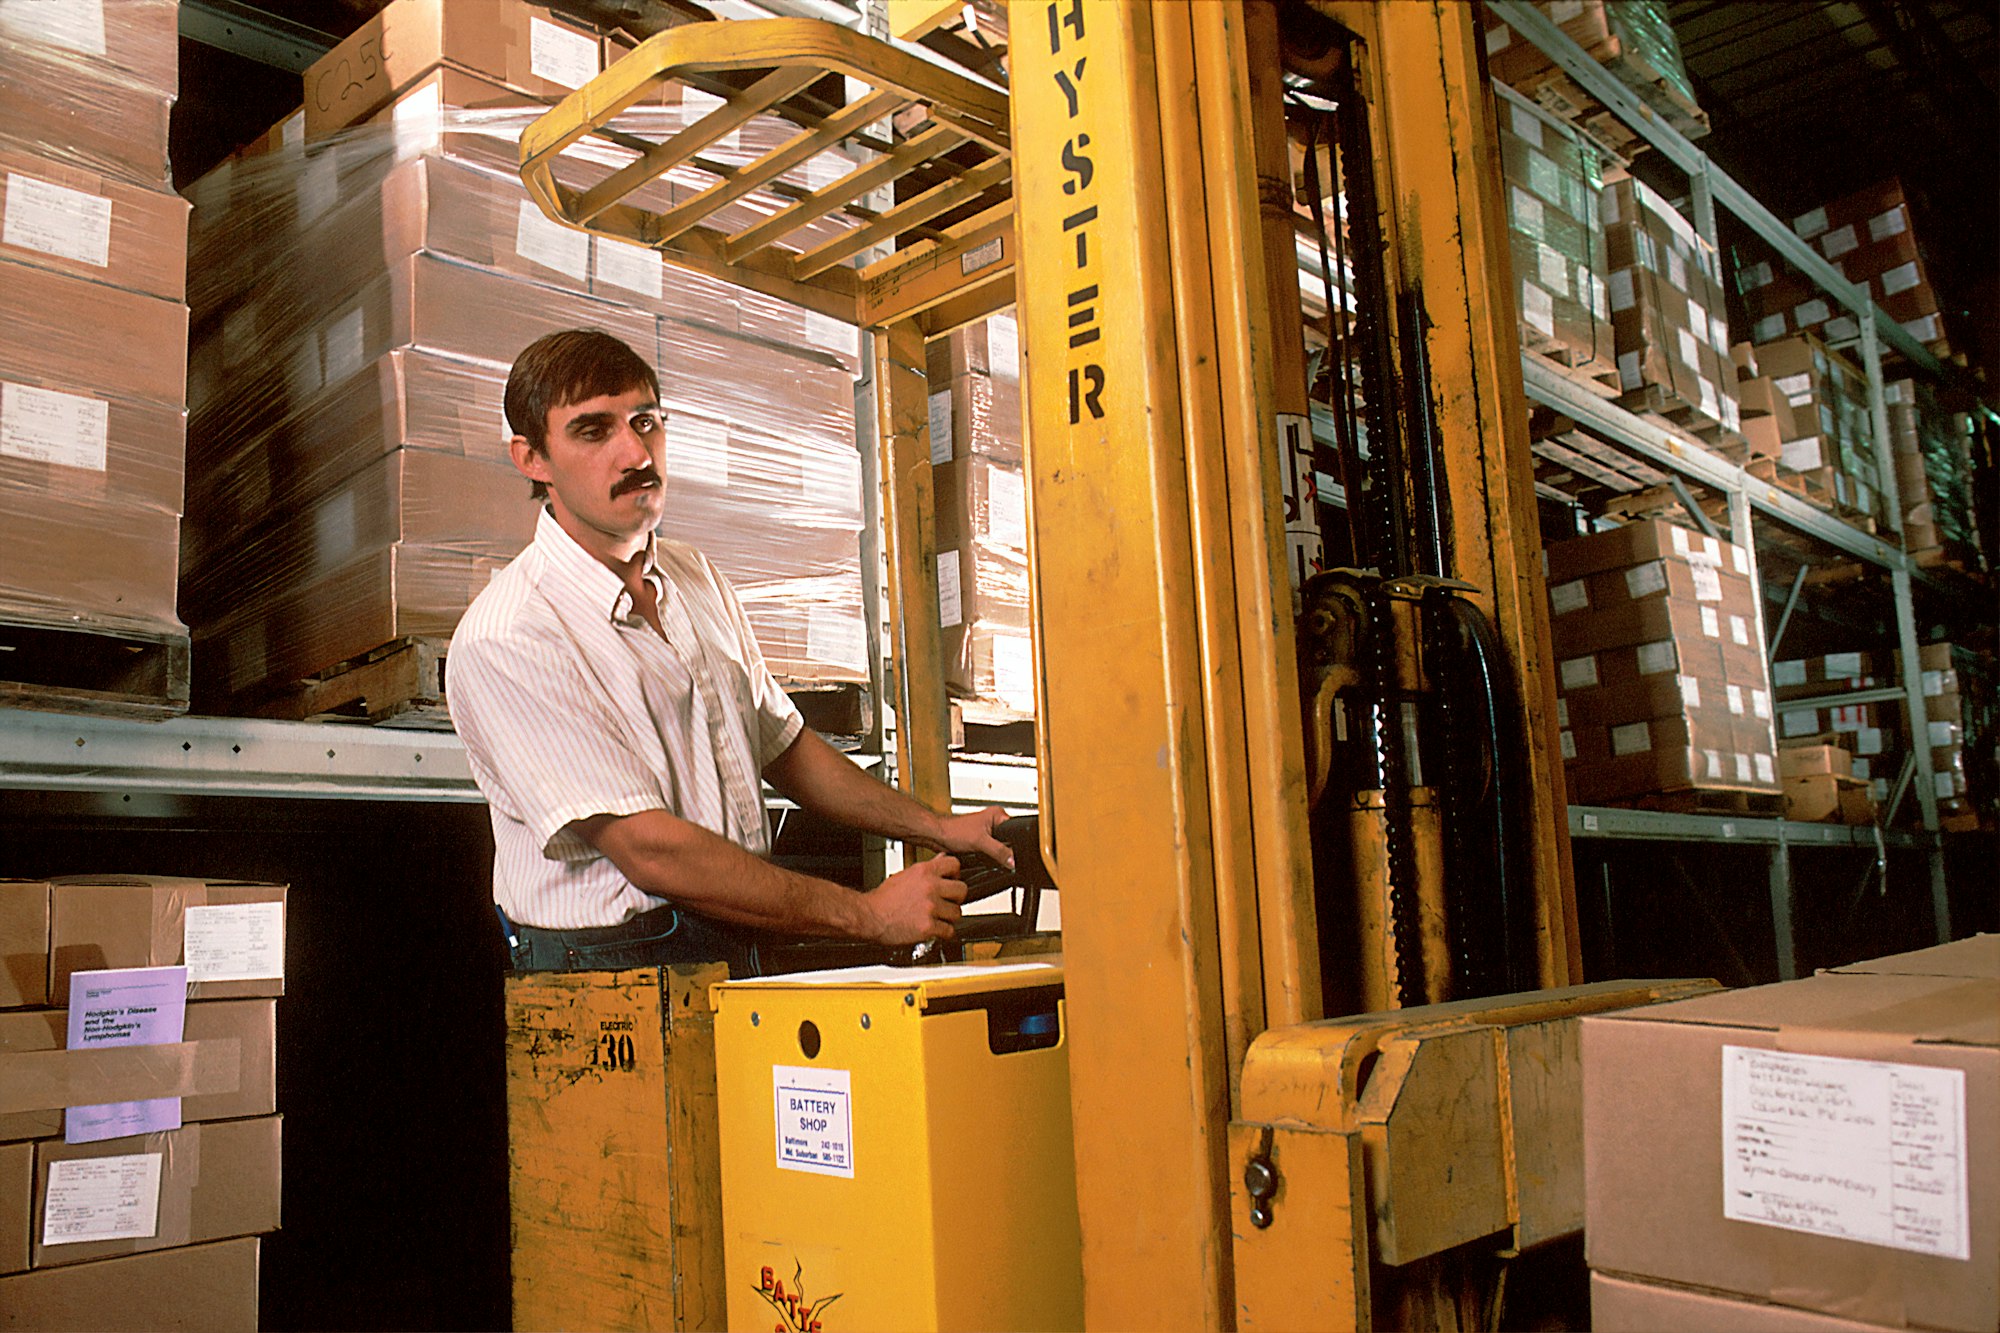 A man driving a fork lift in the warehouse that was once used for the storage and distribution of NCI publications ordered through the NCI Cancer Information Service (CIS). 1988